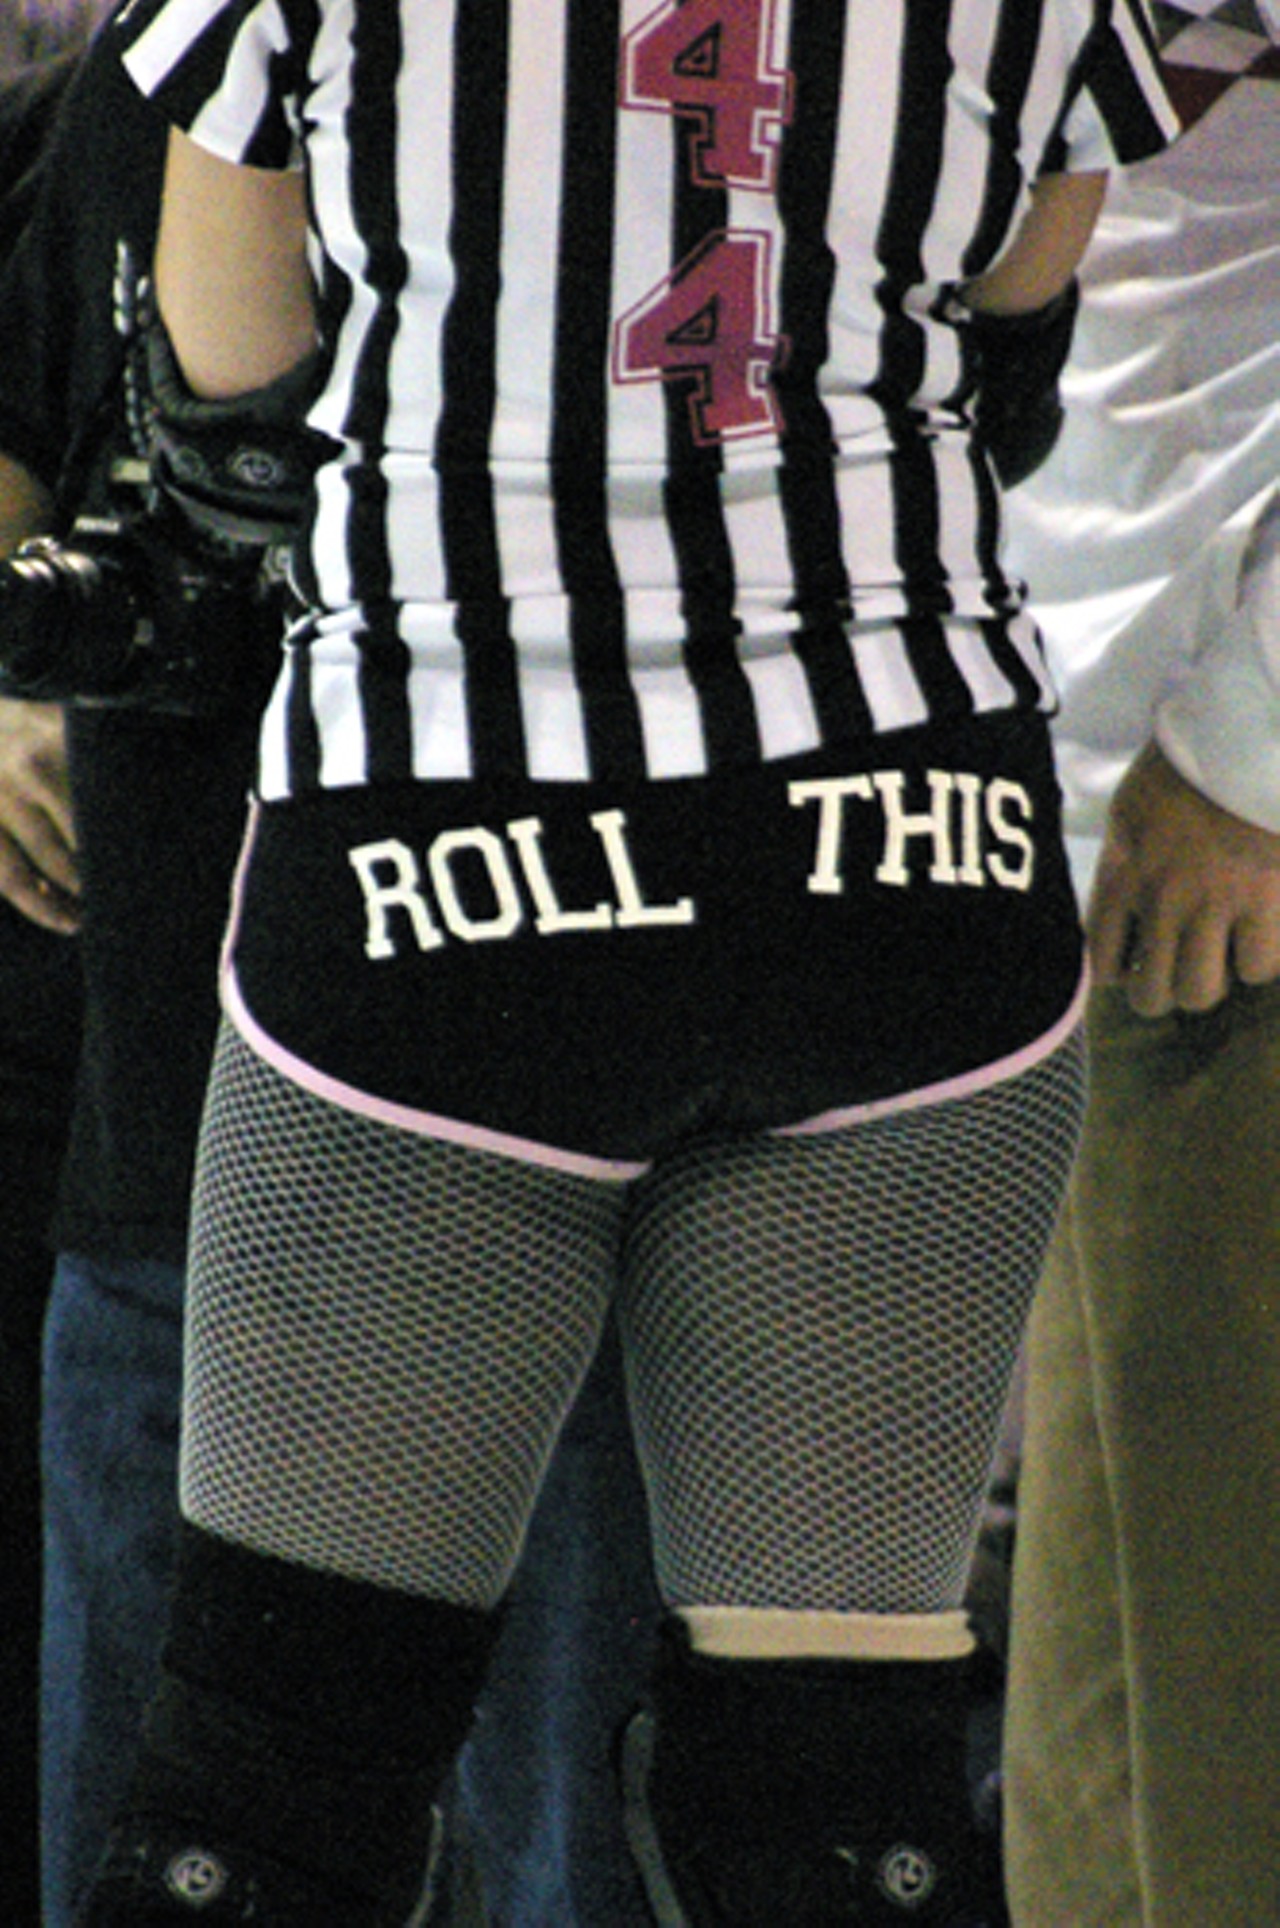 A message from referee Rockity Roller.